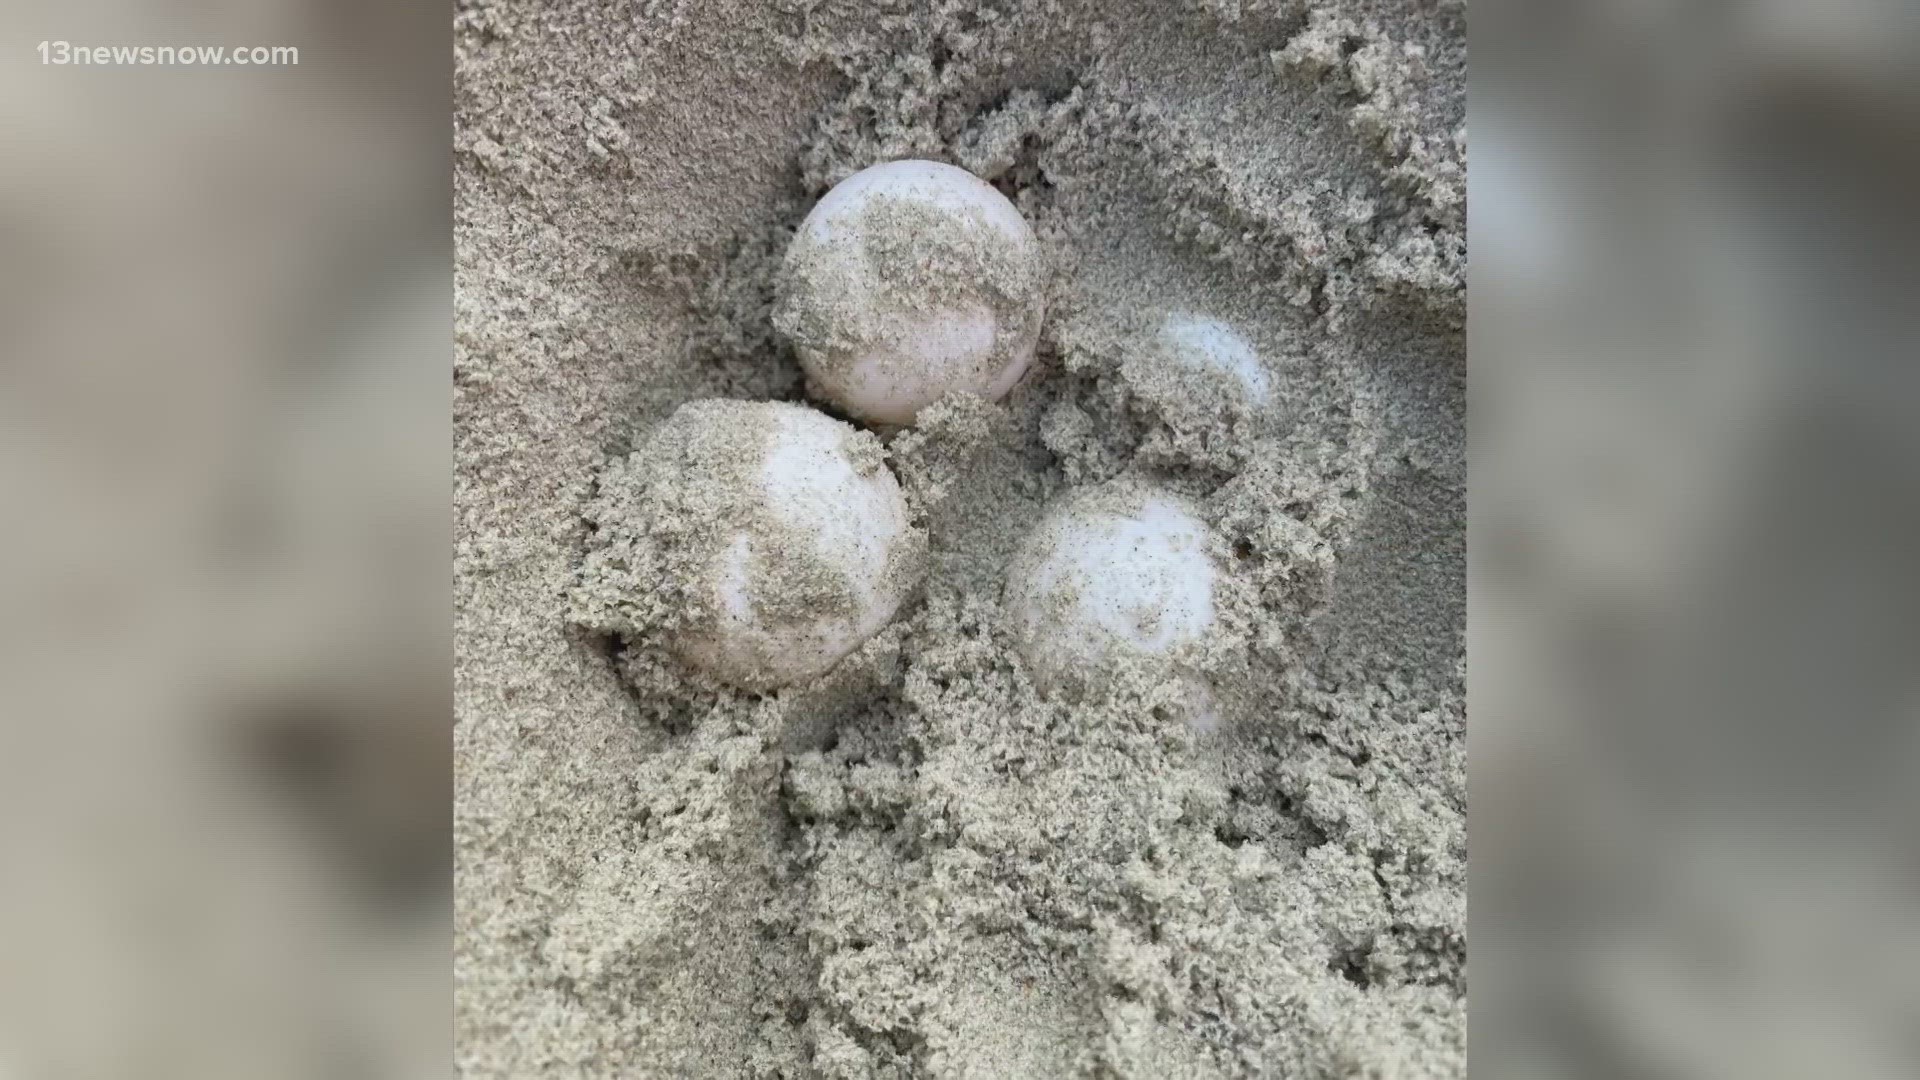 Biologists found Loggerhead turtle tracks on Ocracoke island, which lead them to discover the newly laid eggs.